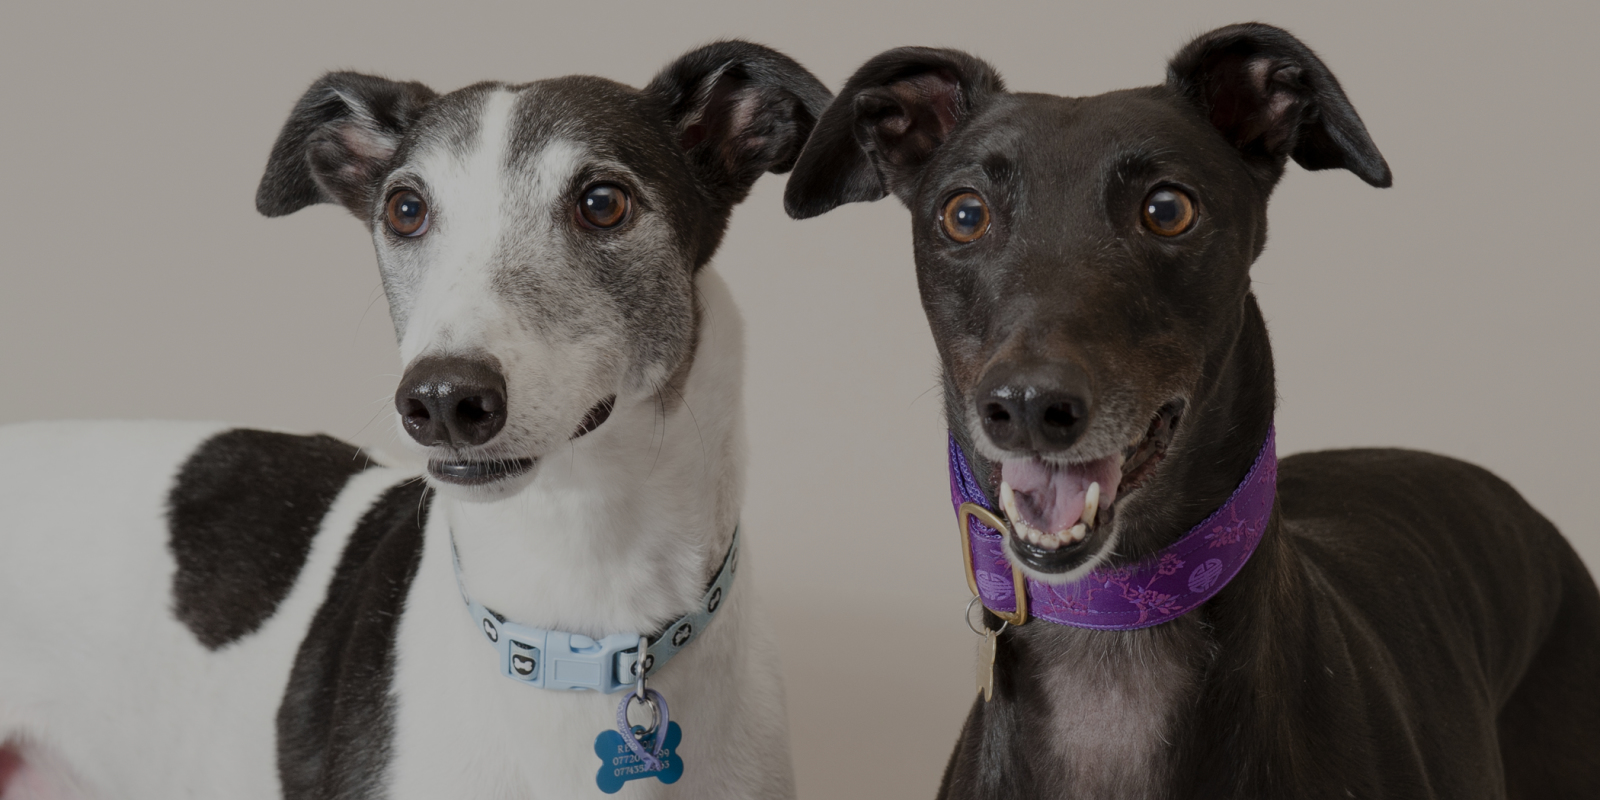 Professional portrait of two greyhounds